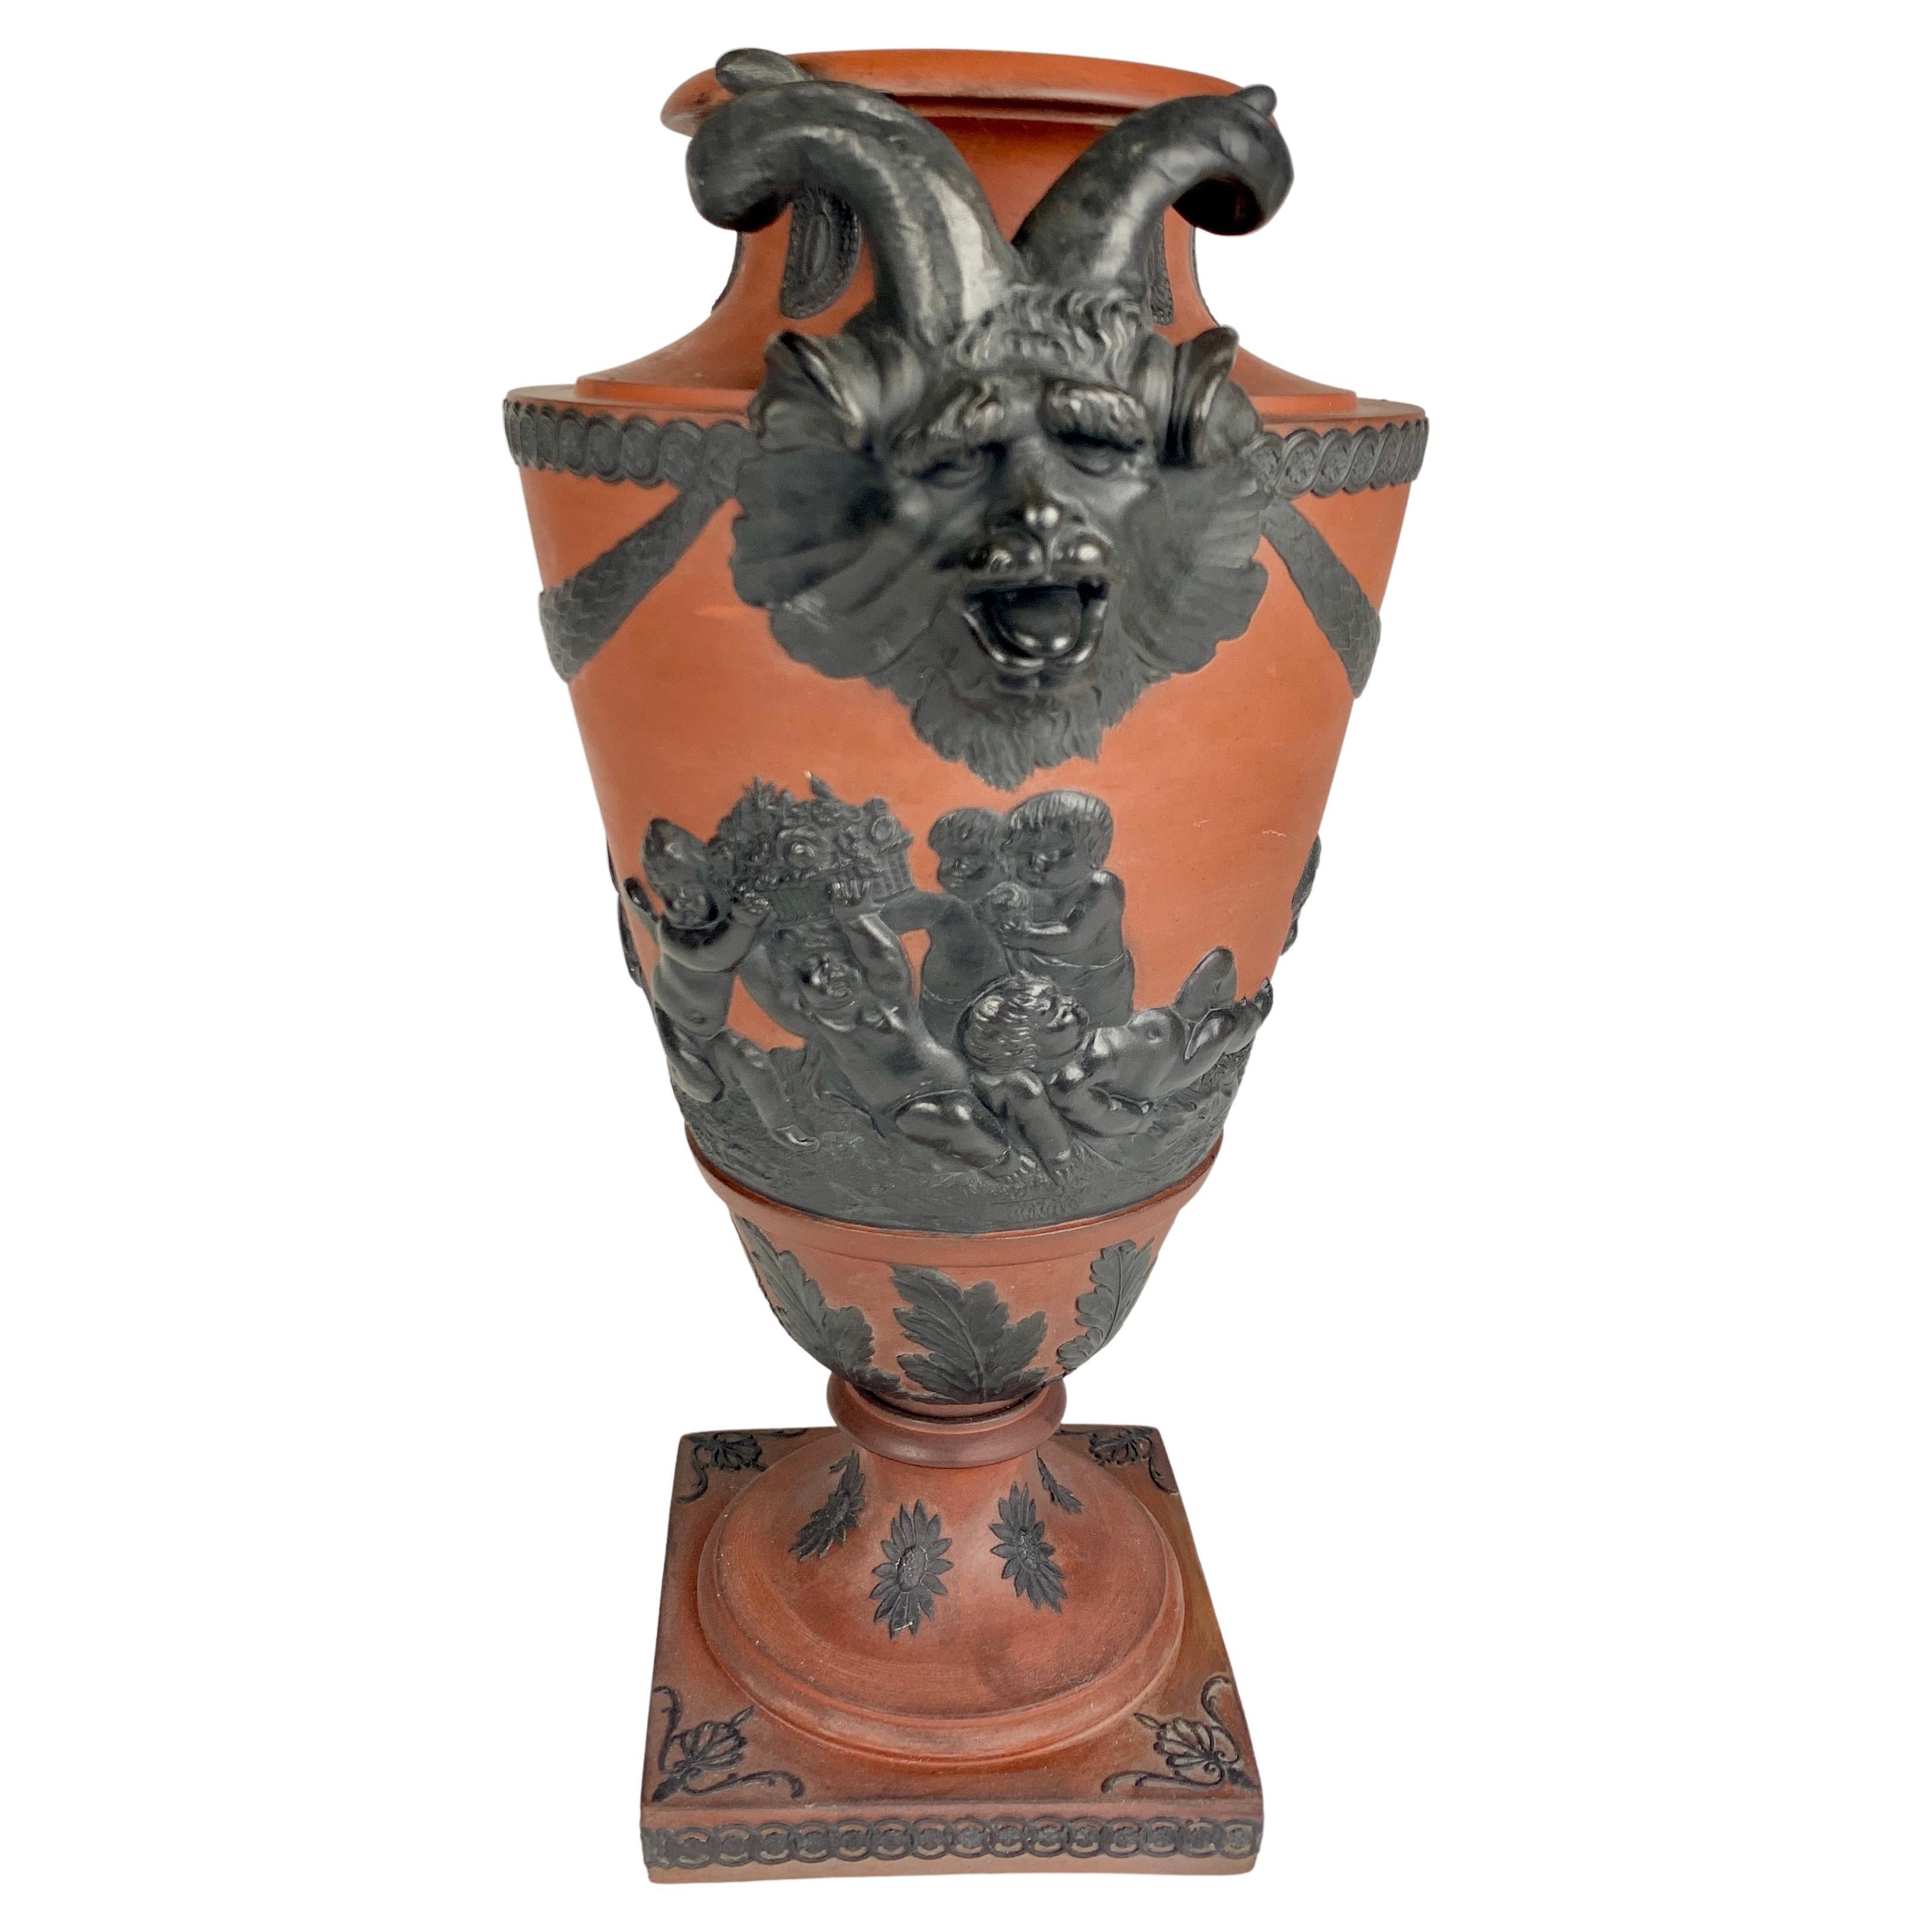 Rosso Antico and Black Basalt Vase Made Circa 1815 with Neoclassical Decoration